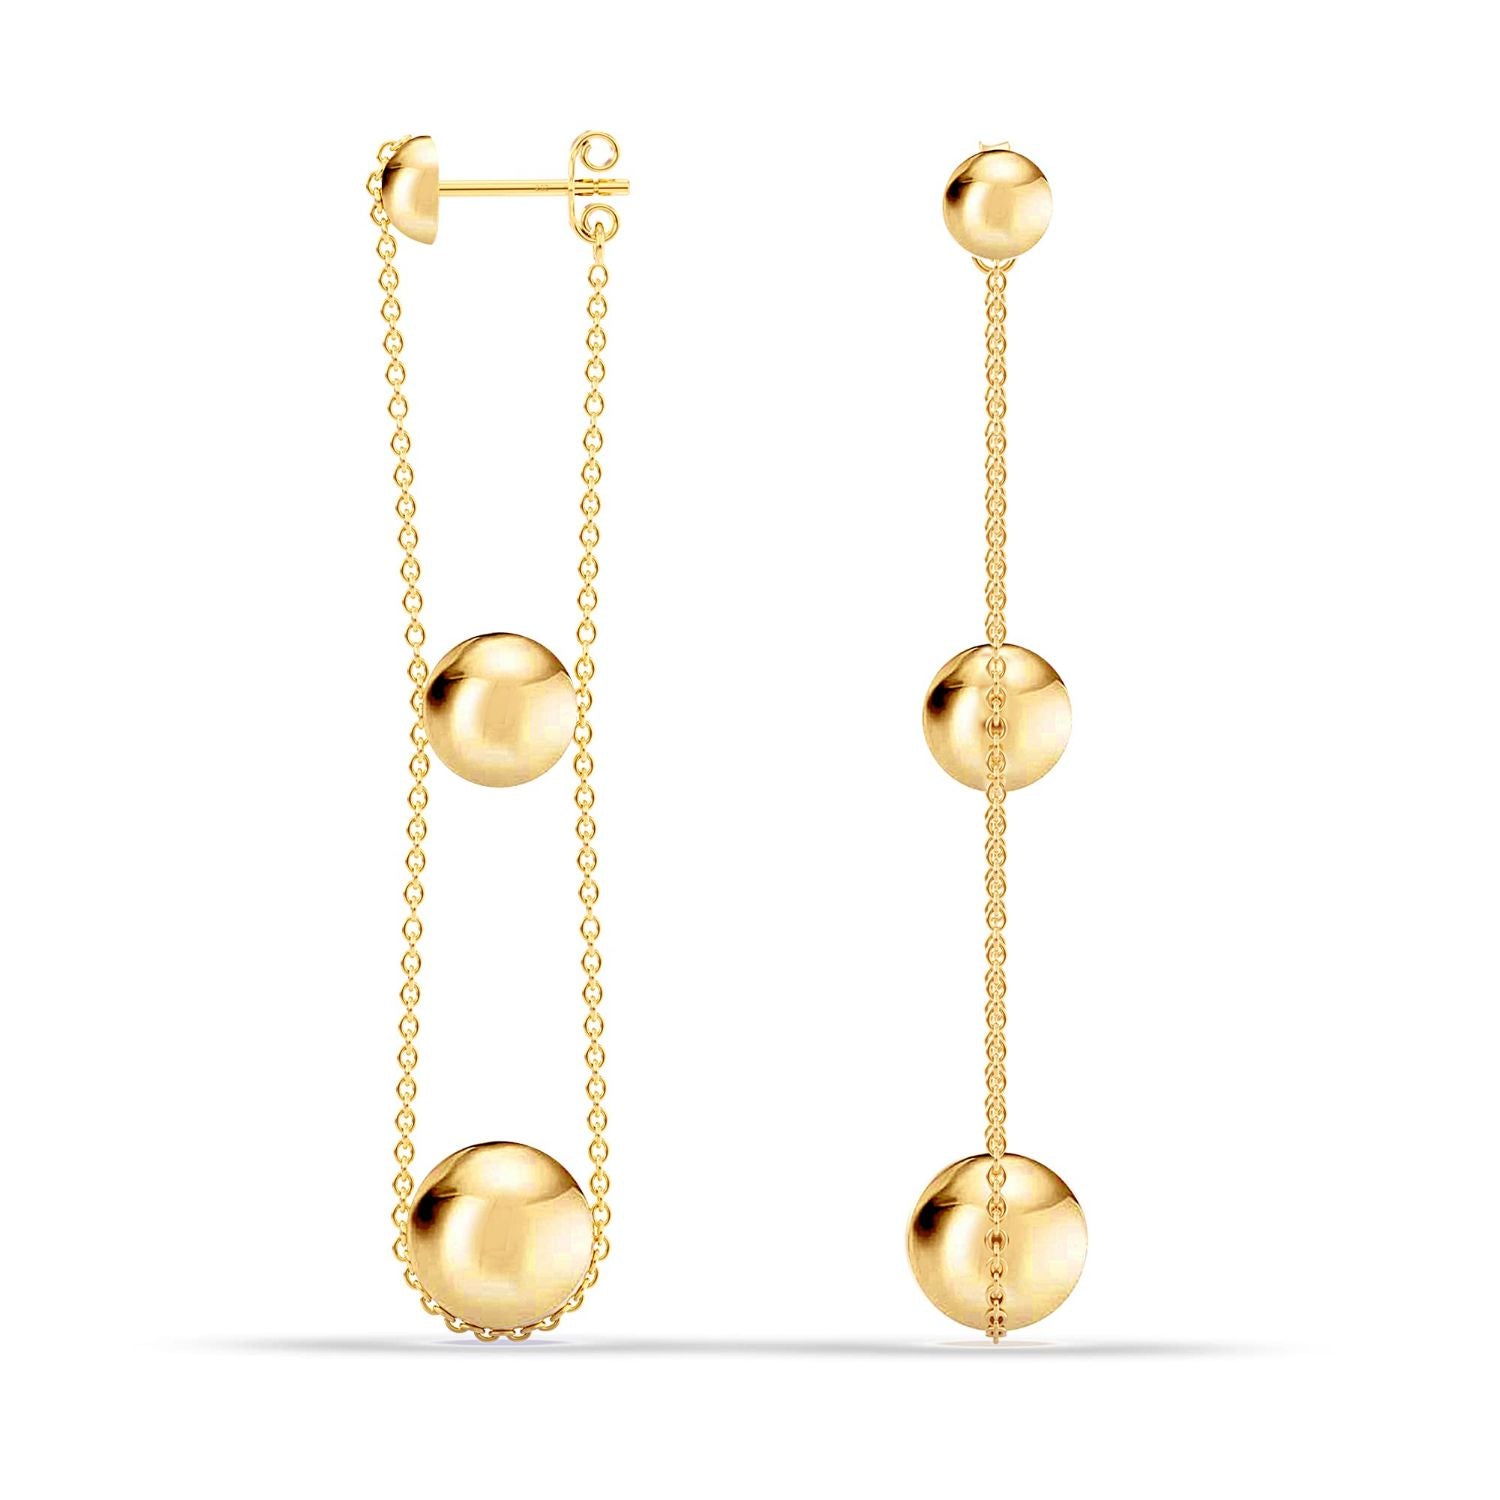 925 Sterling Silver Gold-Plated Yellow Gold Classic Ball Triple Drop Dangle Earrings for Women Teen